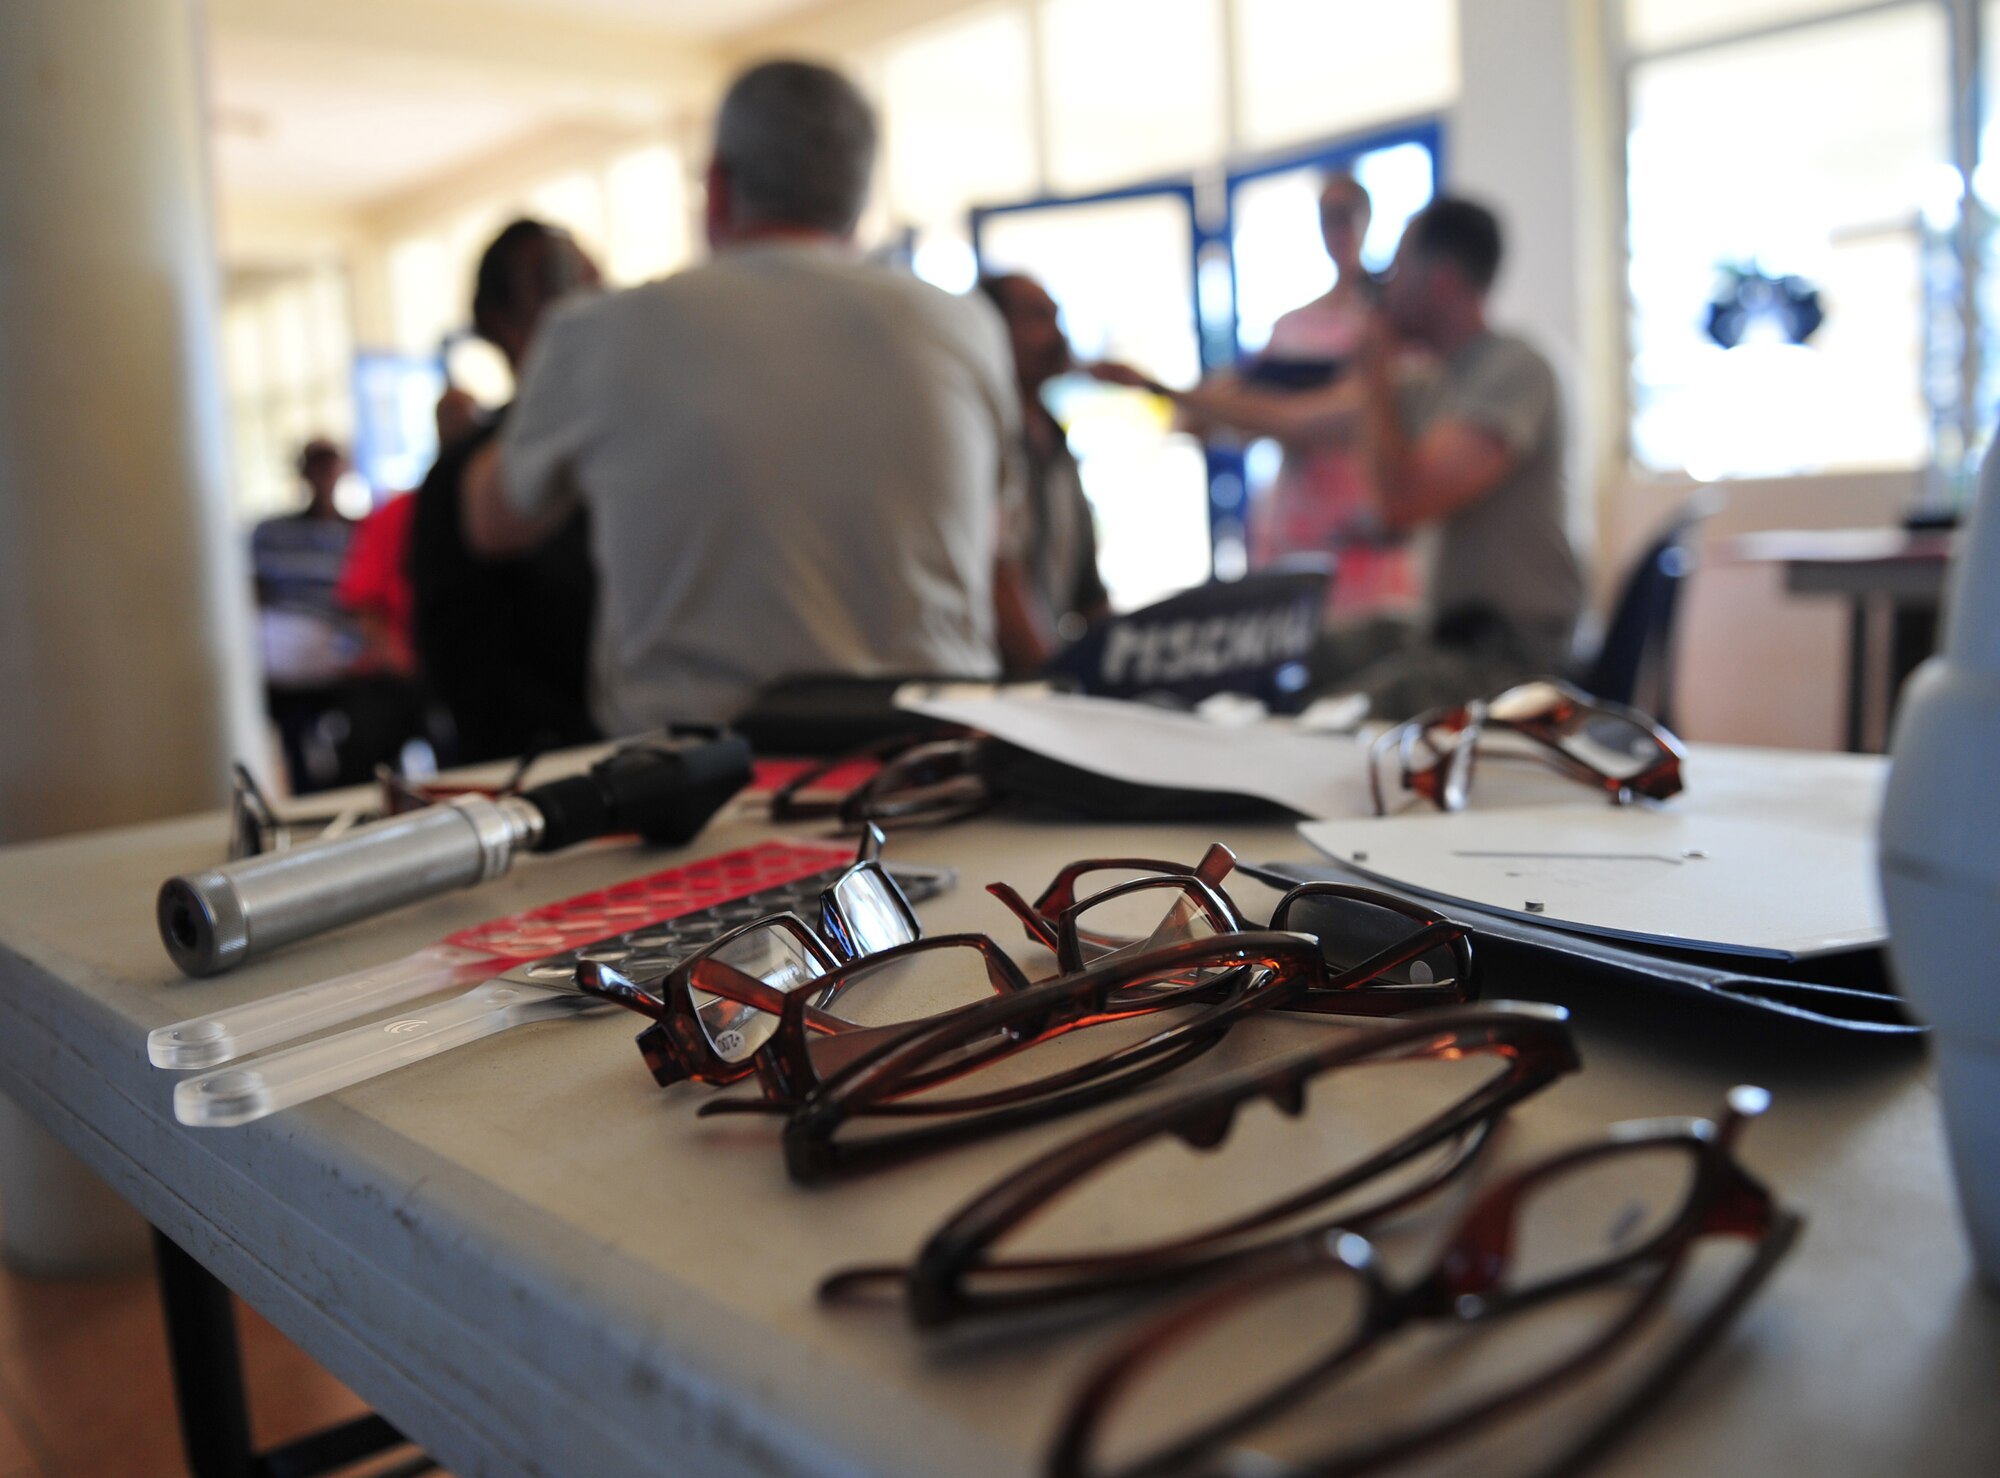 Approximately 2,000 pairs of glasses were delivered to Tonga for those in need of corrective lenses and are prepared July 21, 2014, in Neiafu, Tonga. The optometry clinic was one of four clinics in the healthcare services outreach. The outreach was part of Operation Pacific Angel-Tonga, where, with the help of Red Cross volunteer interpreters, doctors and medical technicians were able to provide acute care and educate patients on preventative health measures for different ailments. (U.S. Air Force photo/Staff Sgt. Rachelle Coleman)